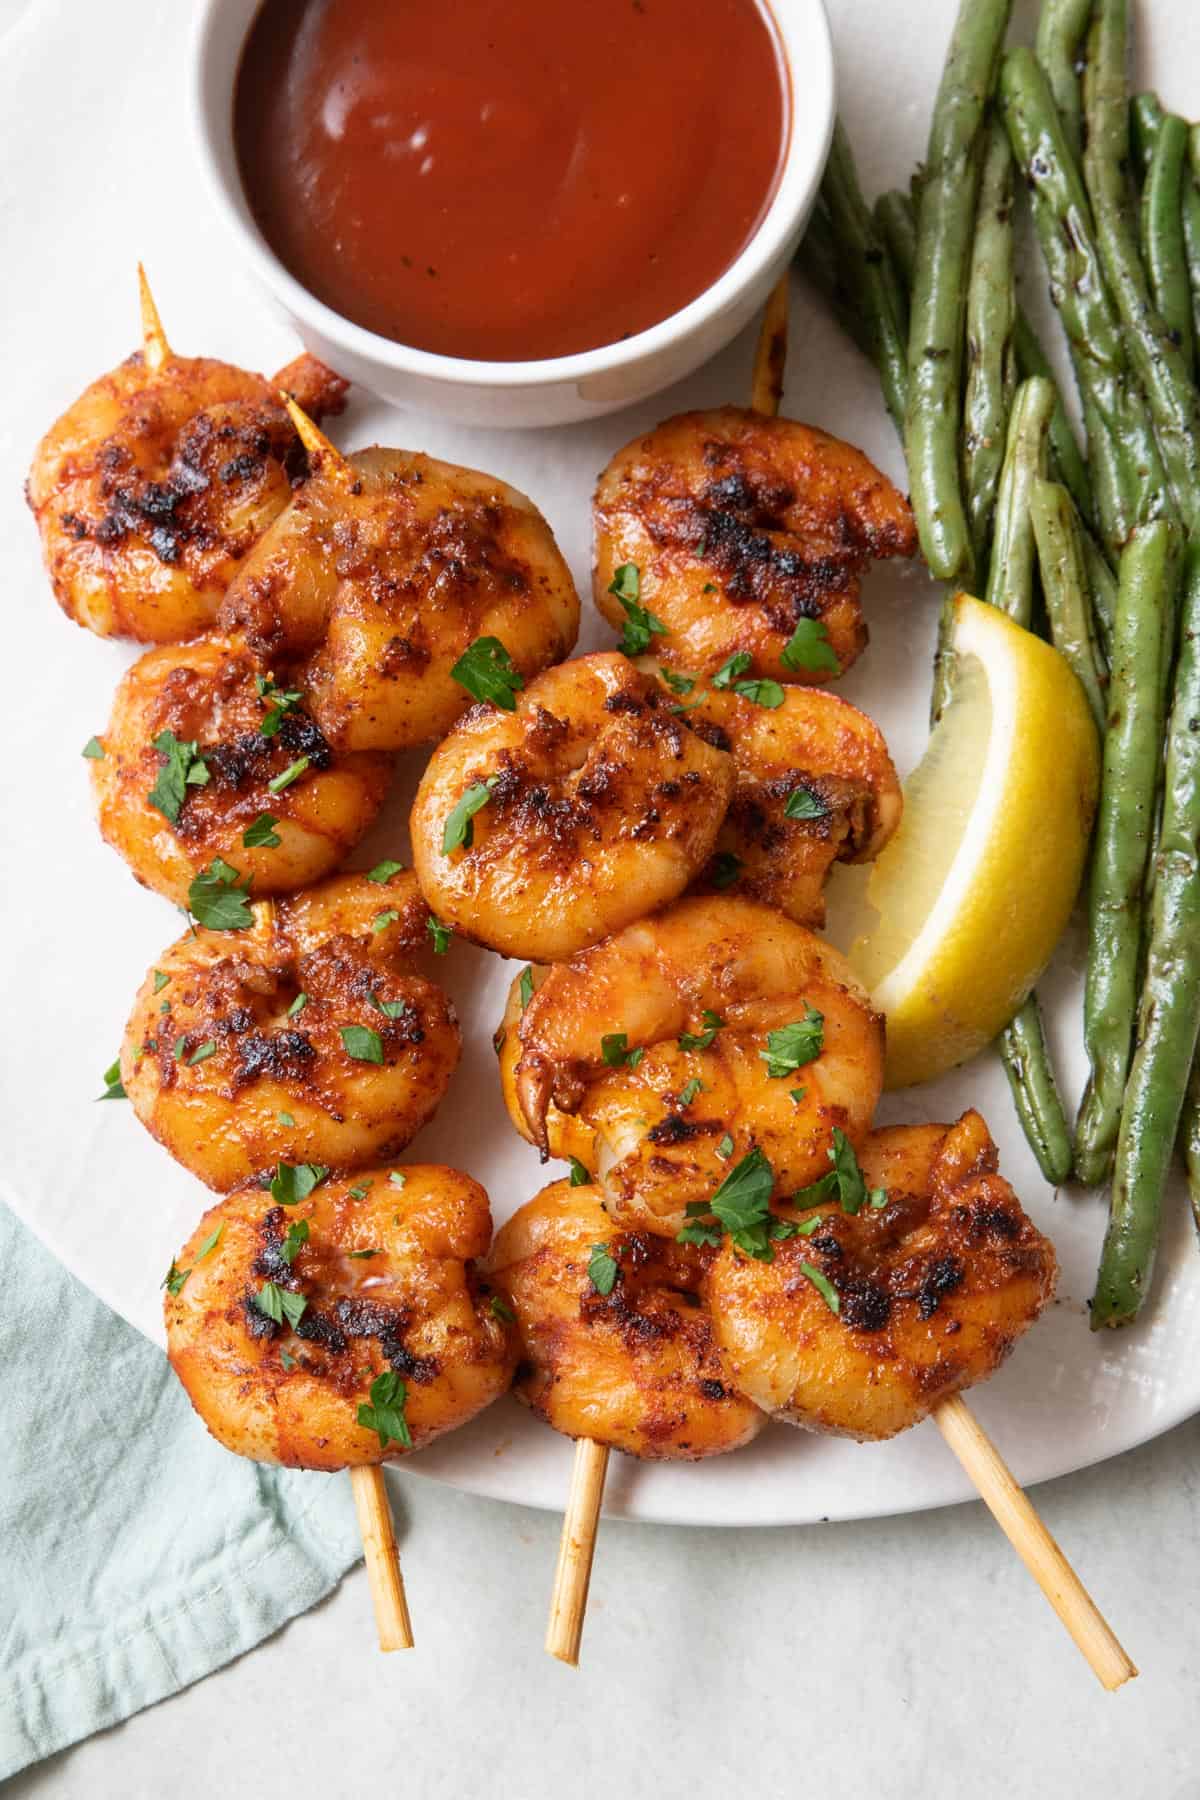 Barbeque grilled shrimp on wooden skewers on a plate with grilled green beans, a small dish of bbq sauce, and lemon wedge.